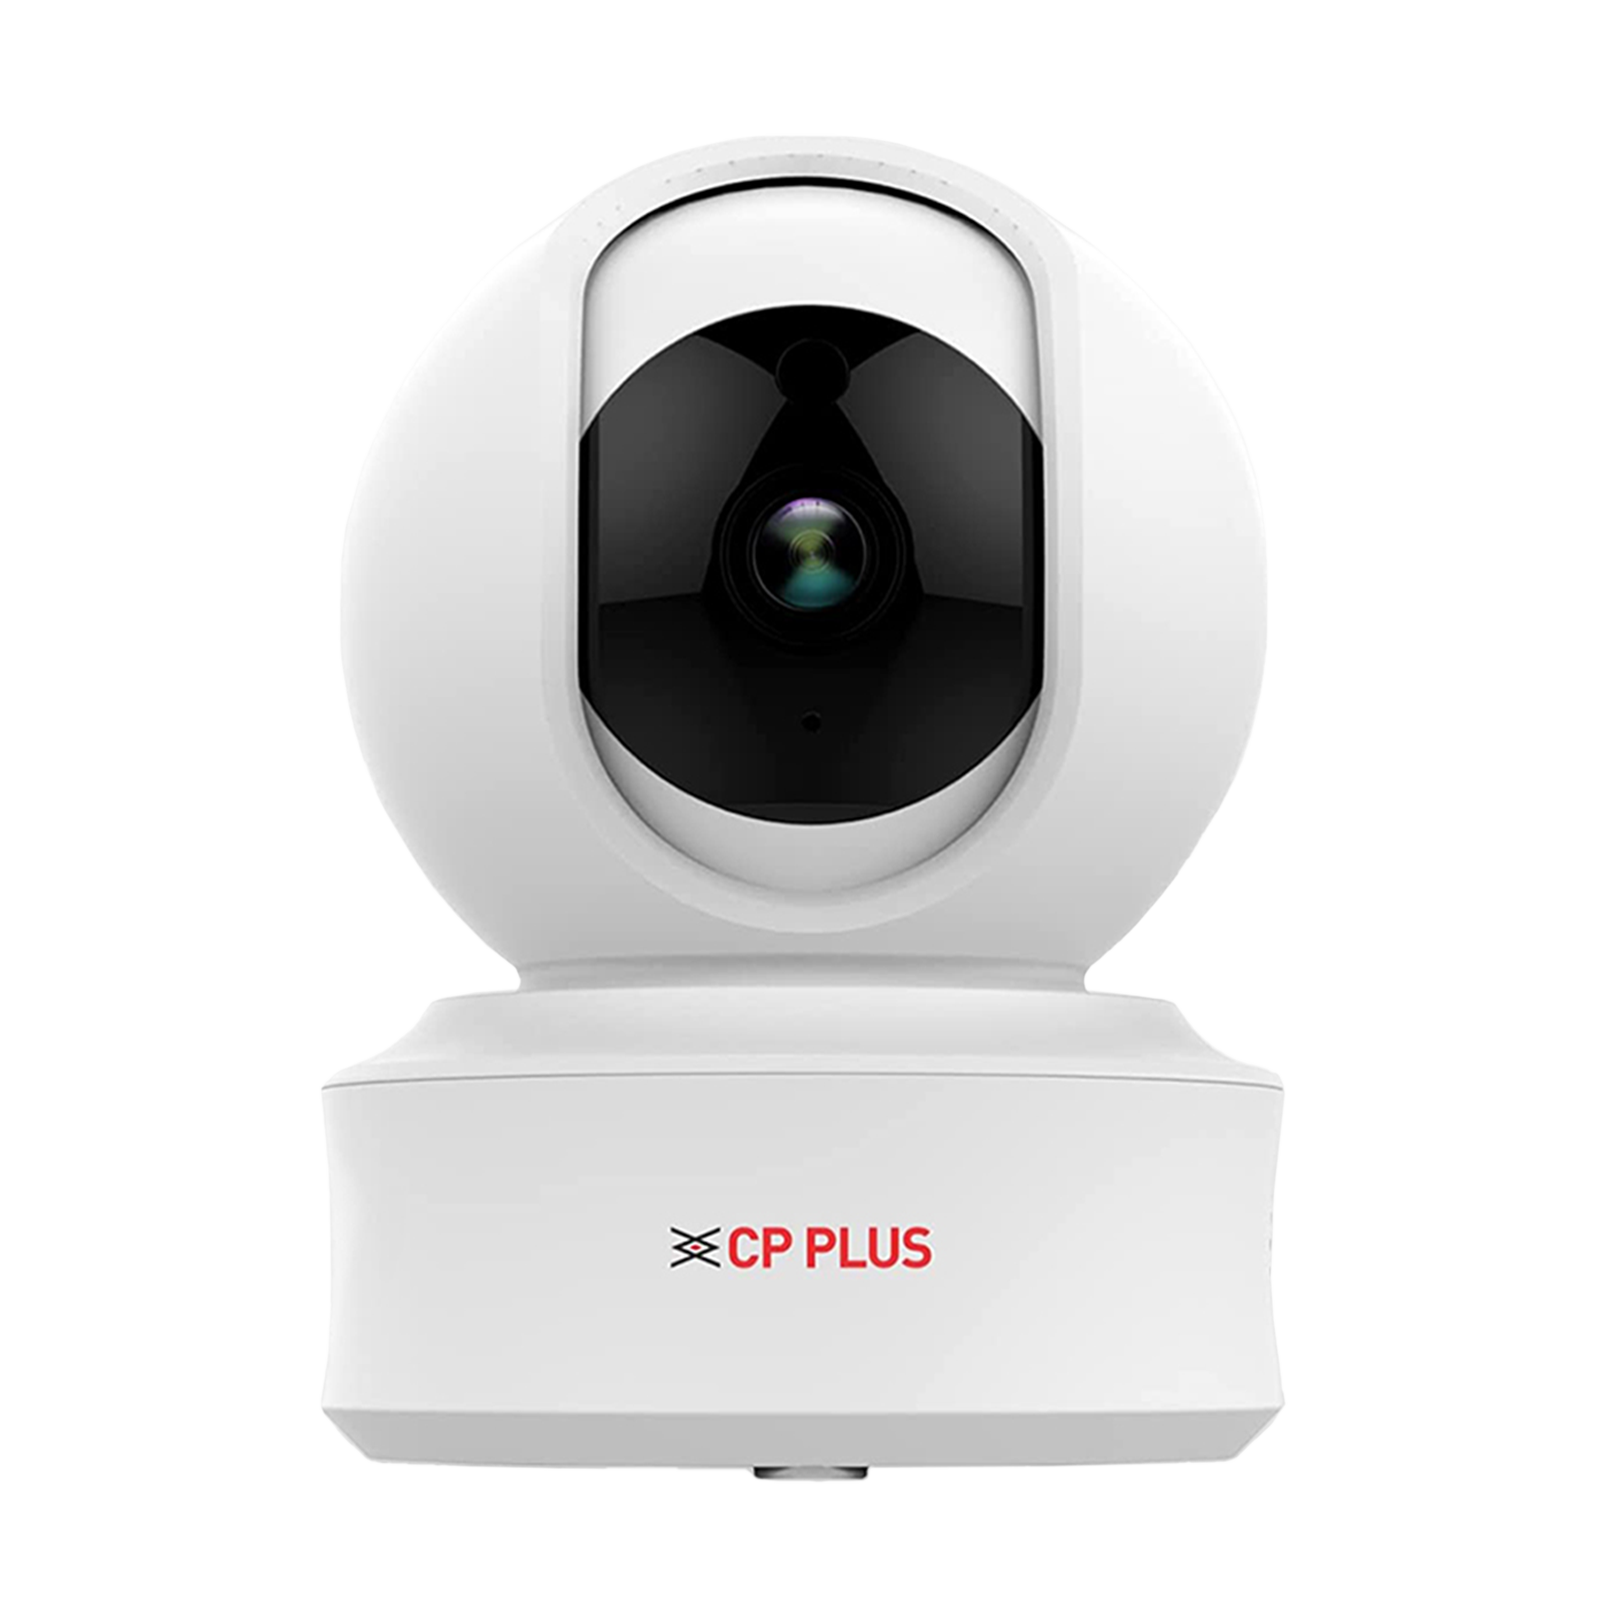 CP PLUS Ezykam Smart CCTV Security Camera (Motion Alert & Google Assistant Support, CP-E21A, White)